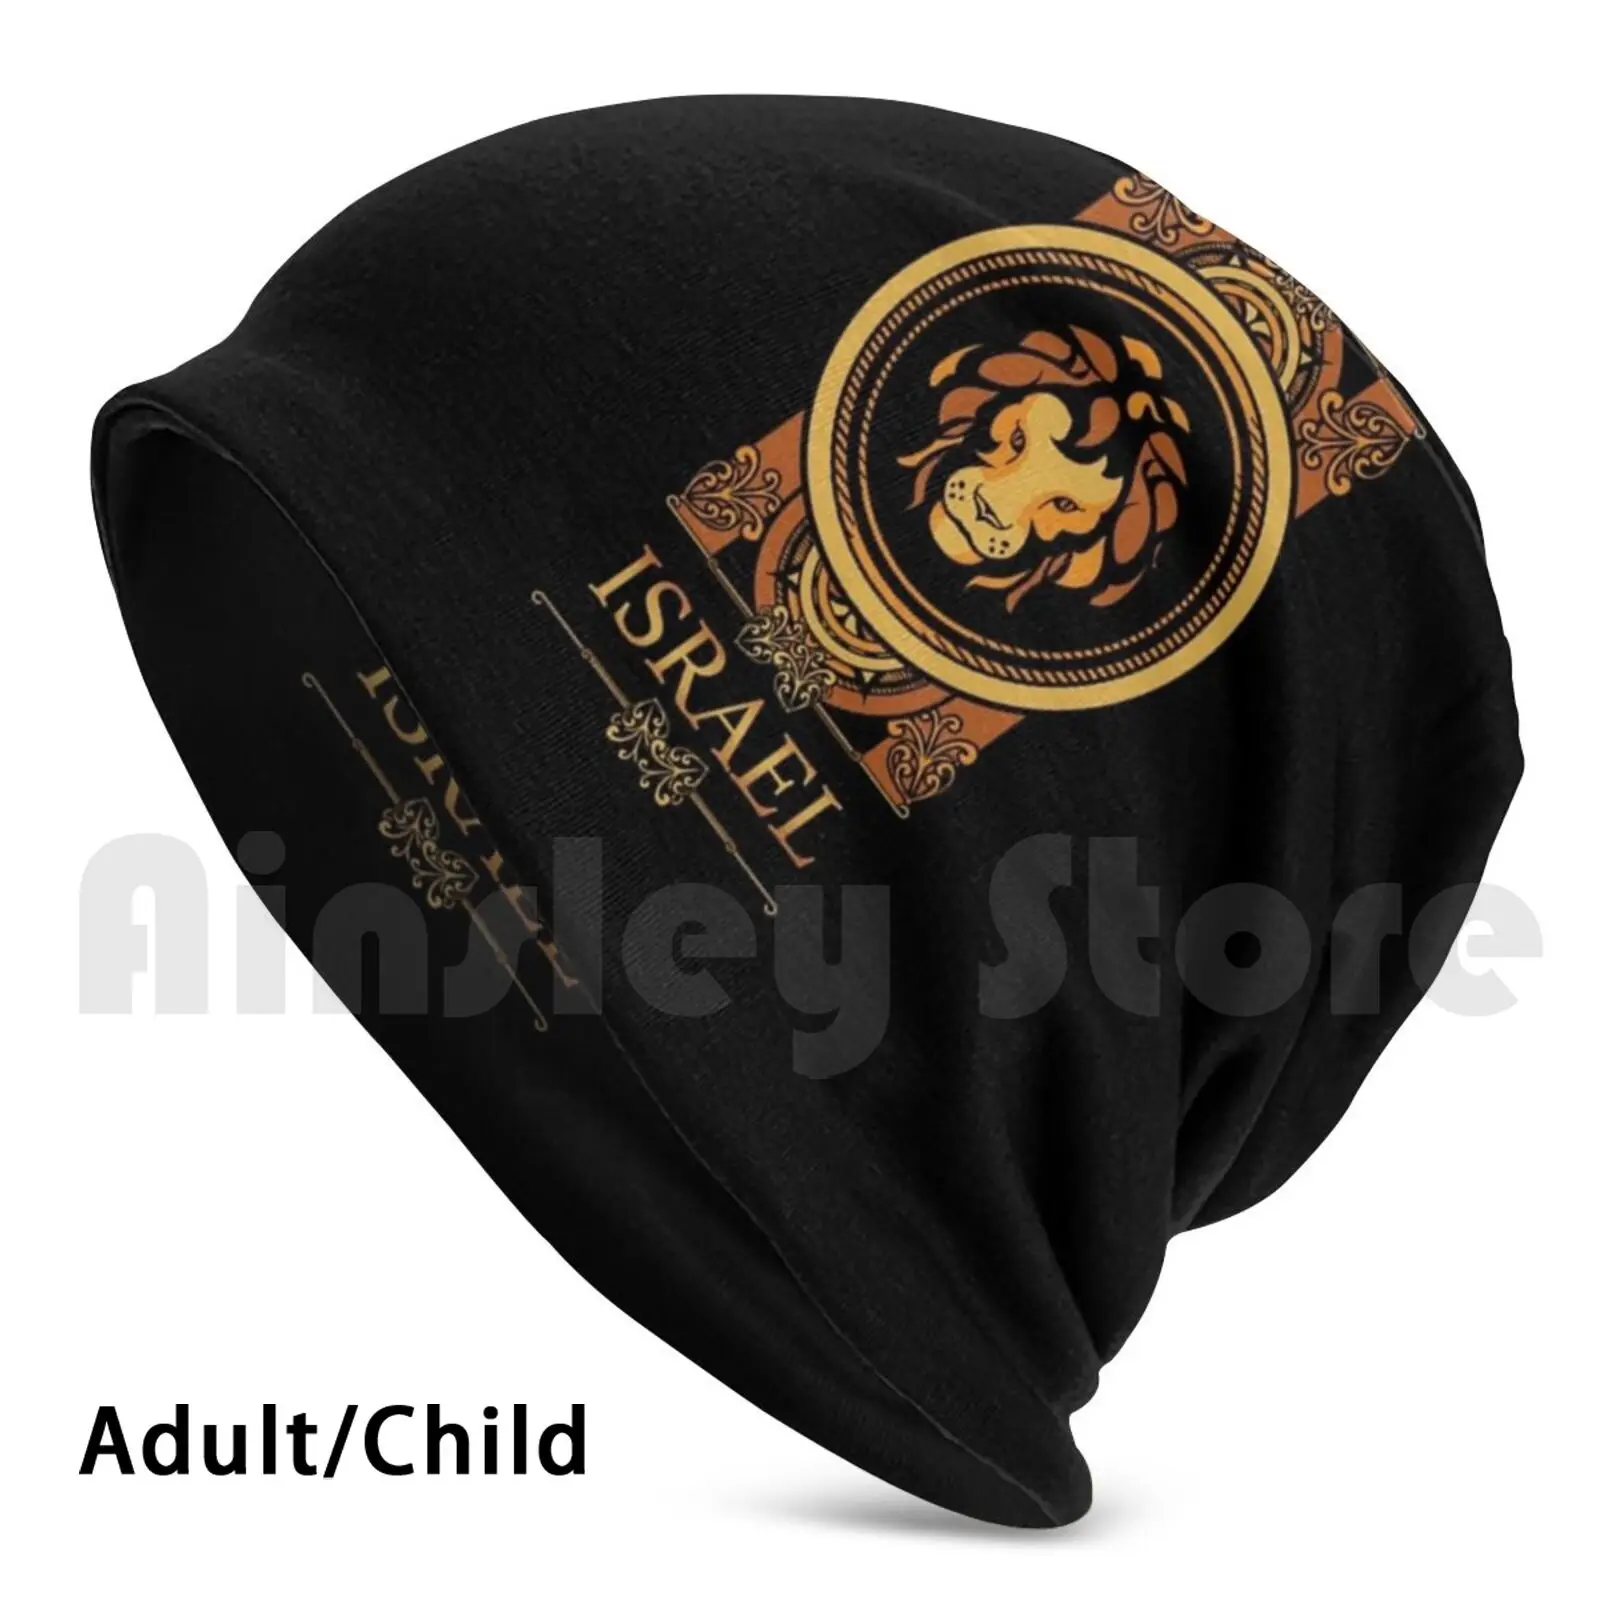 

Israel Name-Lion Leo Star Sign Named Israel Beanies Knit Hat Hip Hop Zodiac Star Sign Birthday Leo July 23rd To